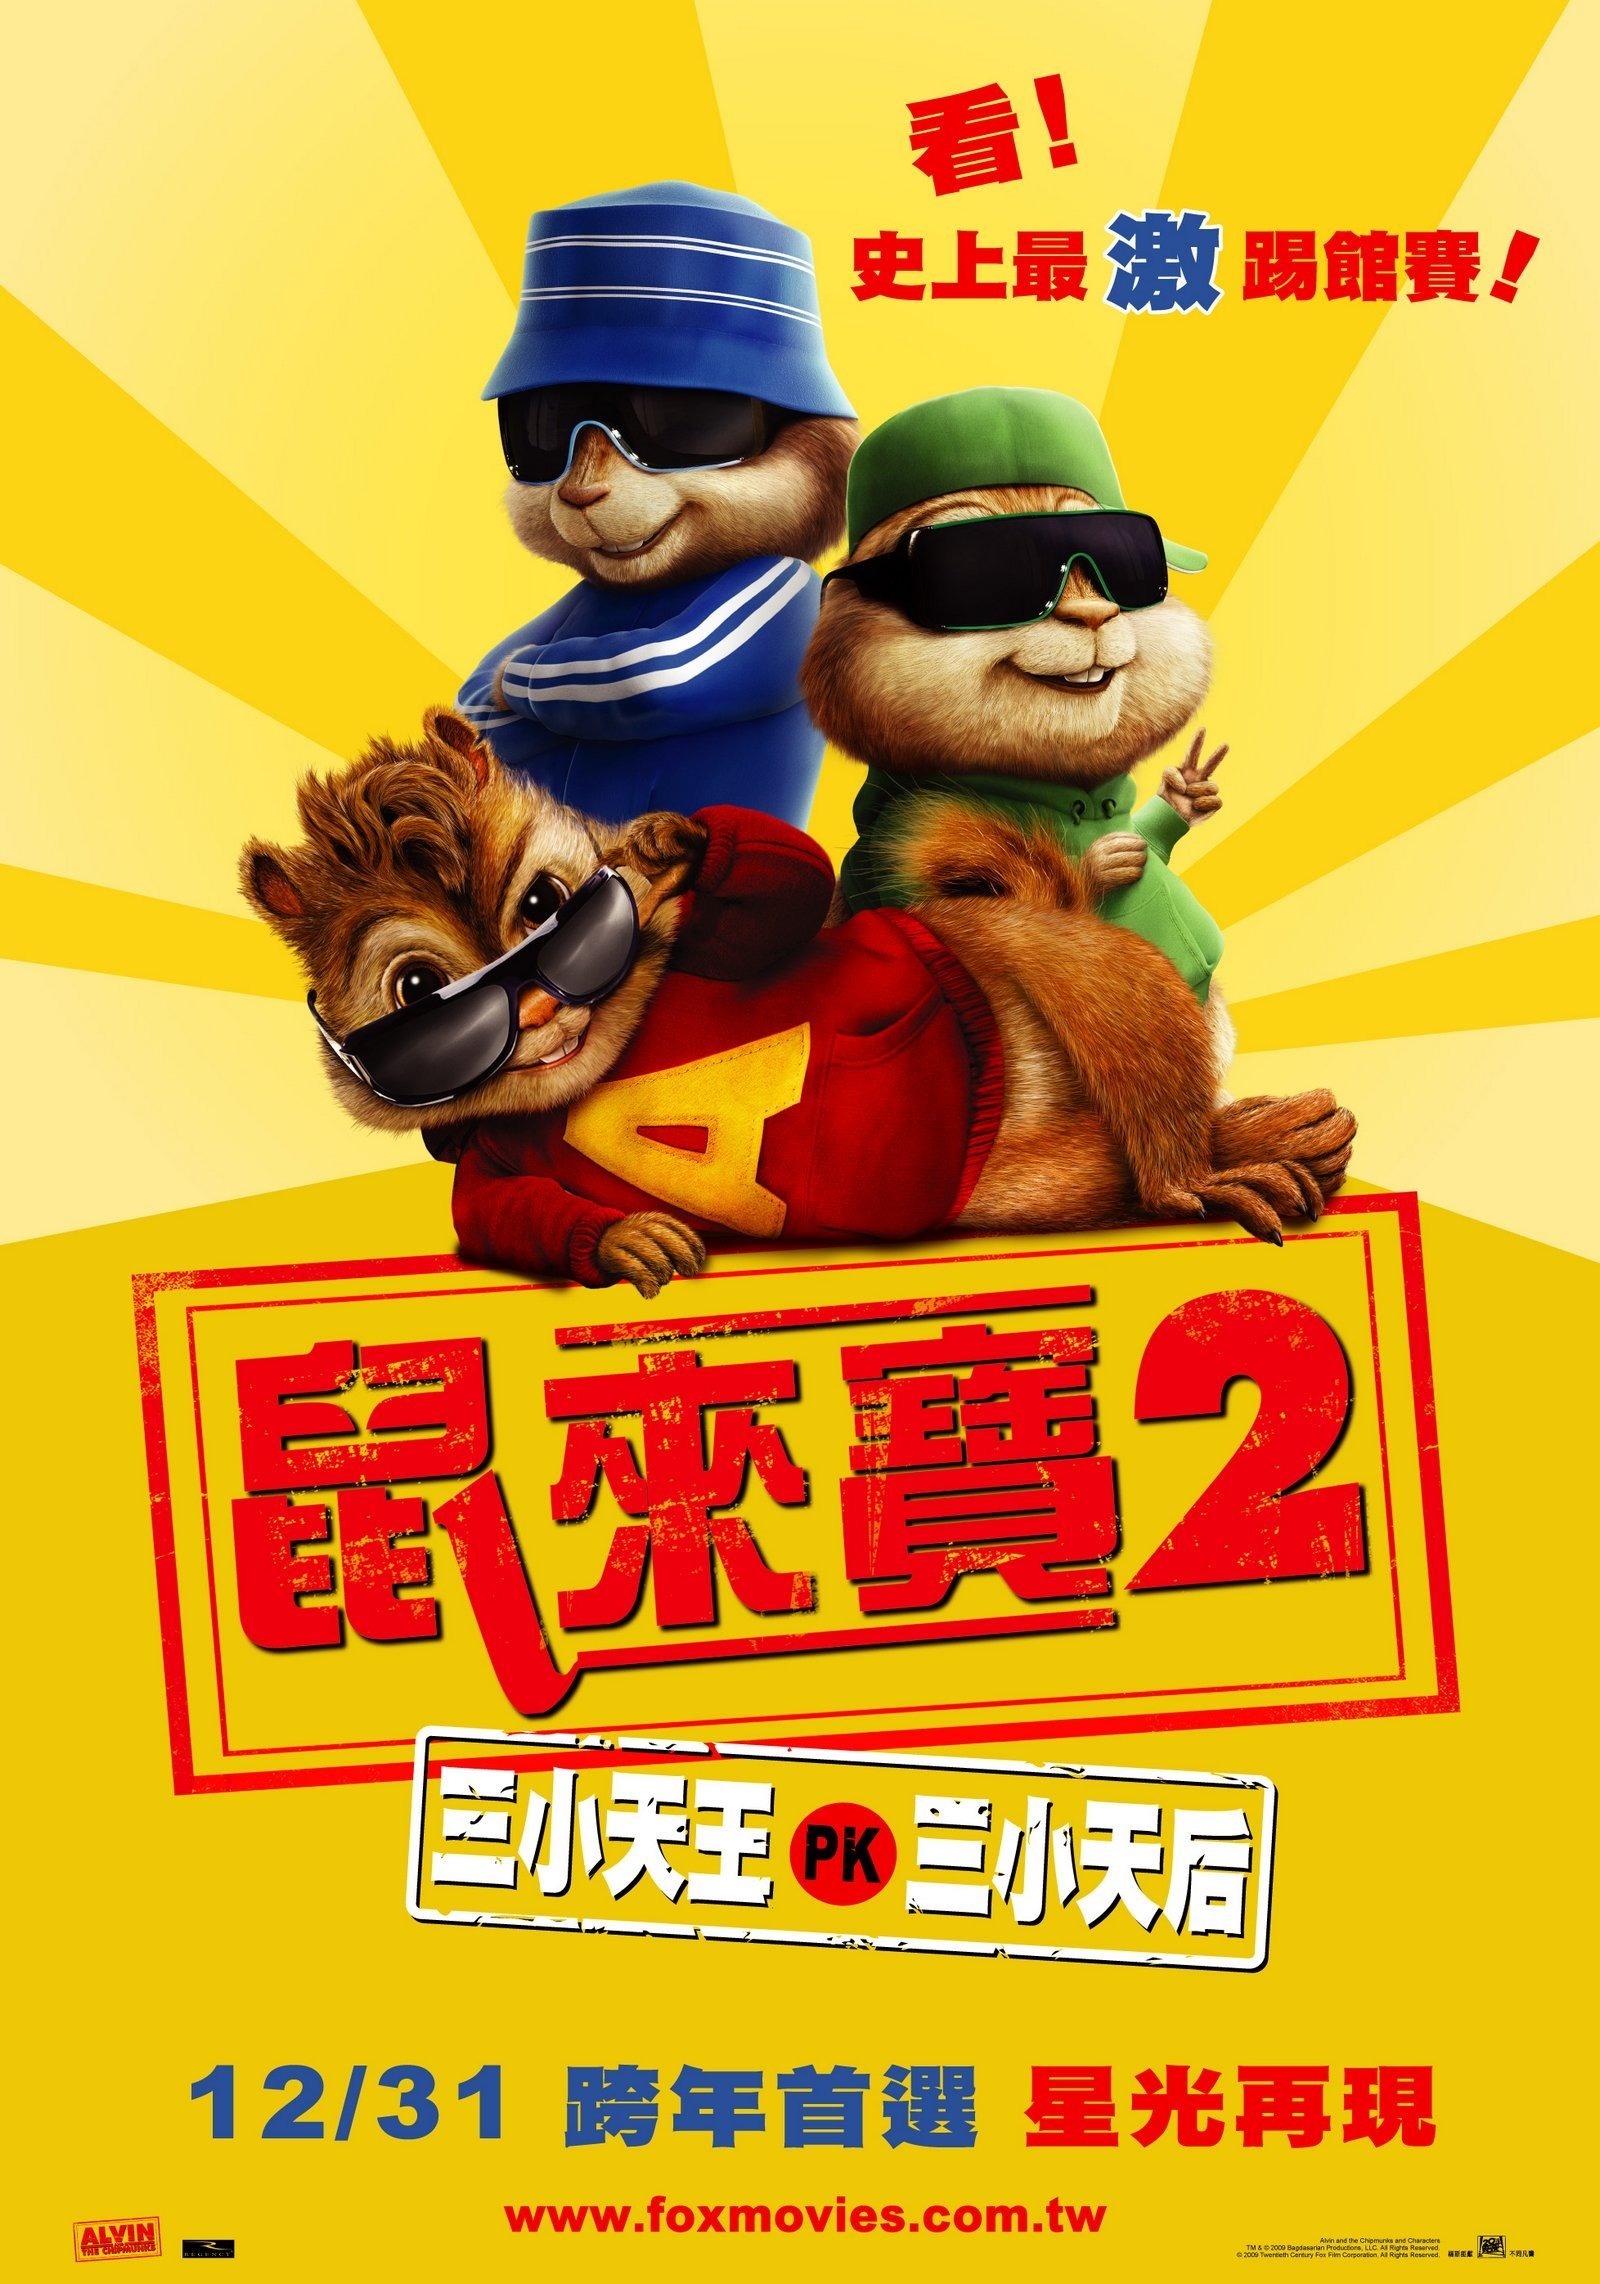 Mega Sized Movie Poster Image for Alvin and the Chipmunks: The Squeakquel (#4 of 14)